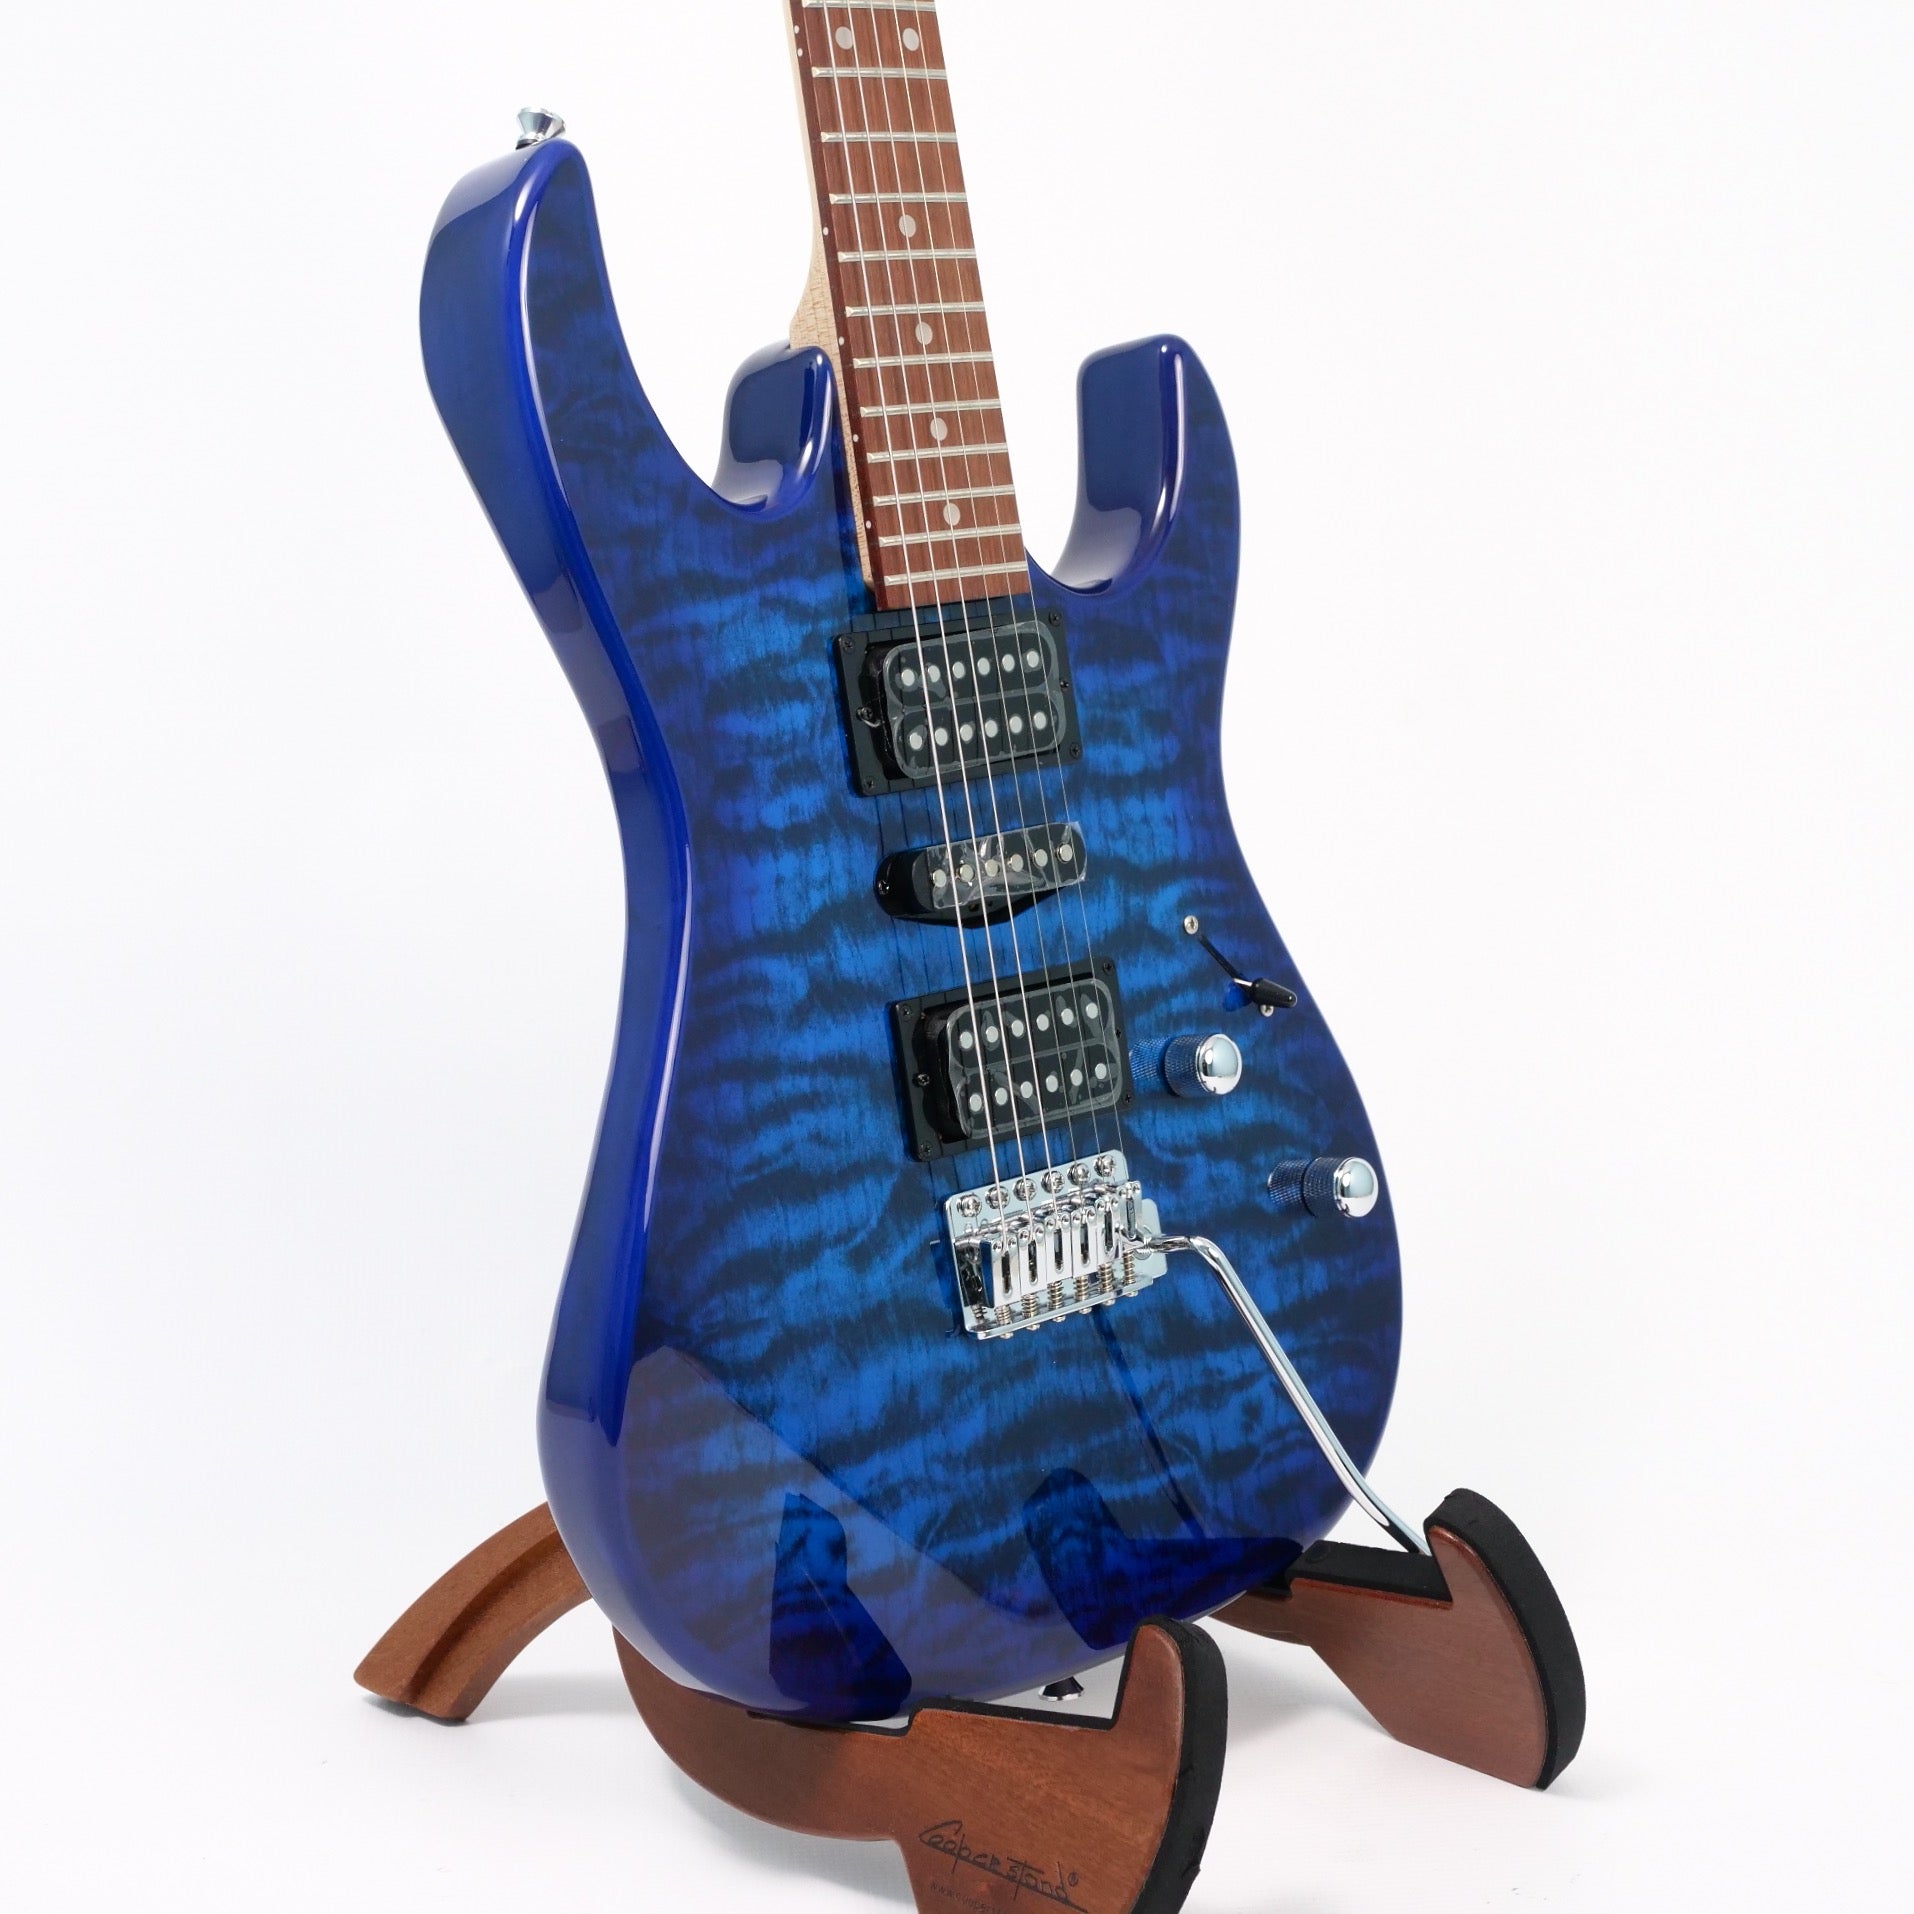 Ibanez GRX70QATBB Gio Quilted Electric Guitar - Trans Blue Burst